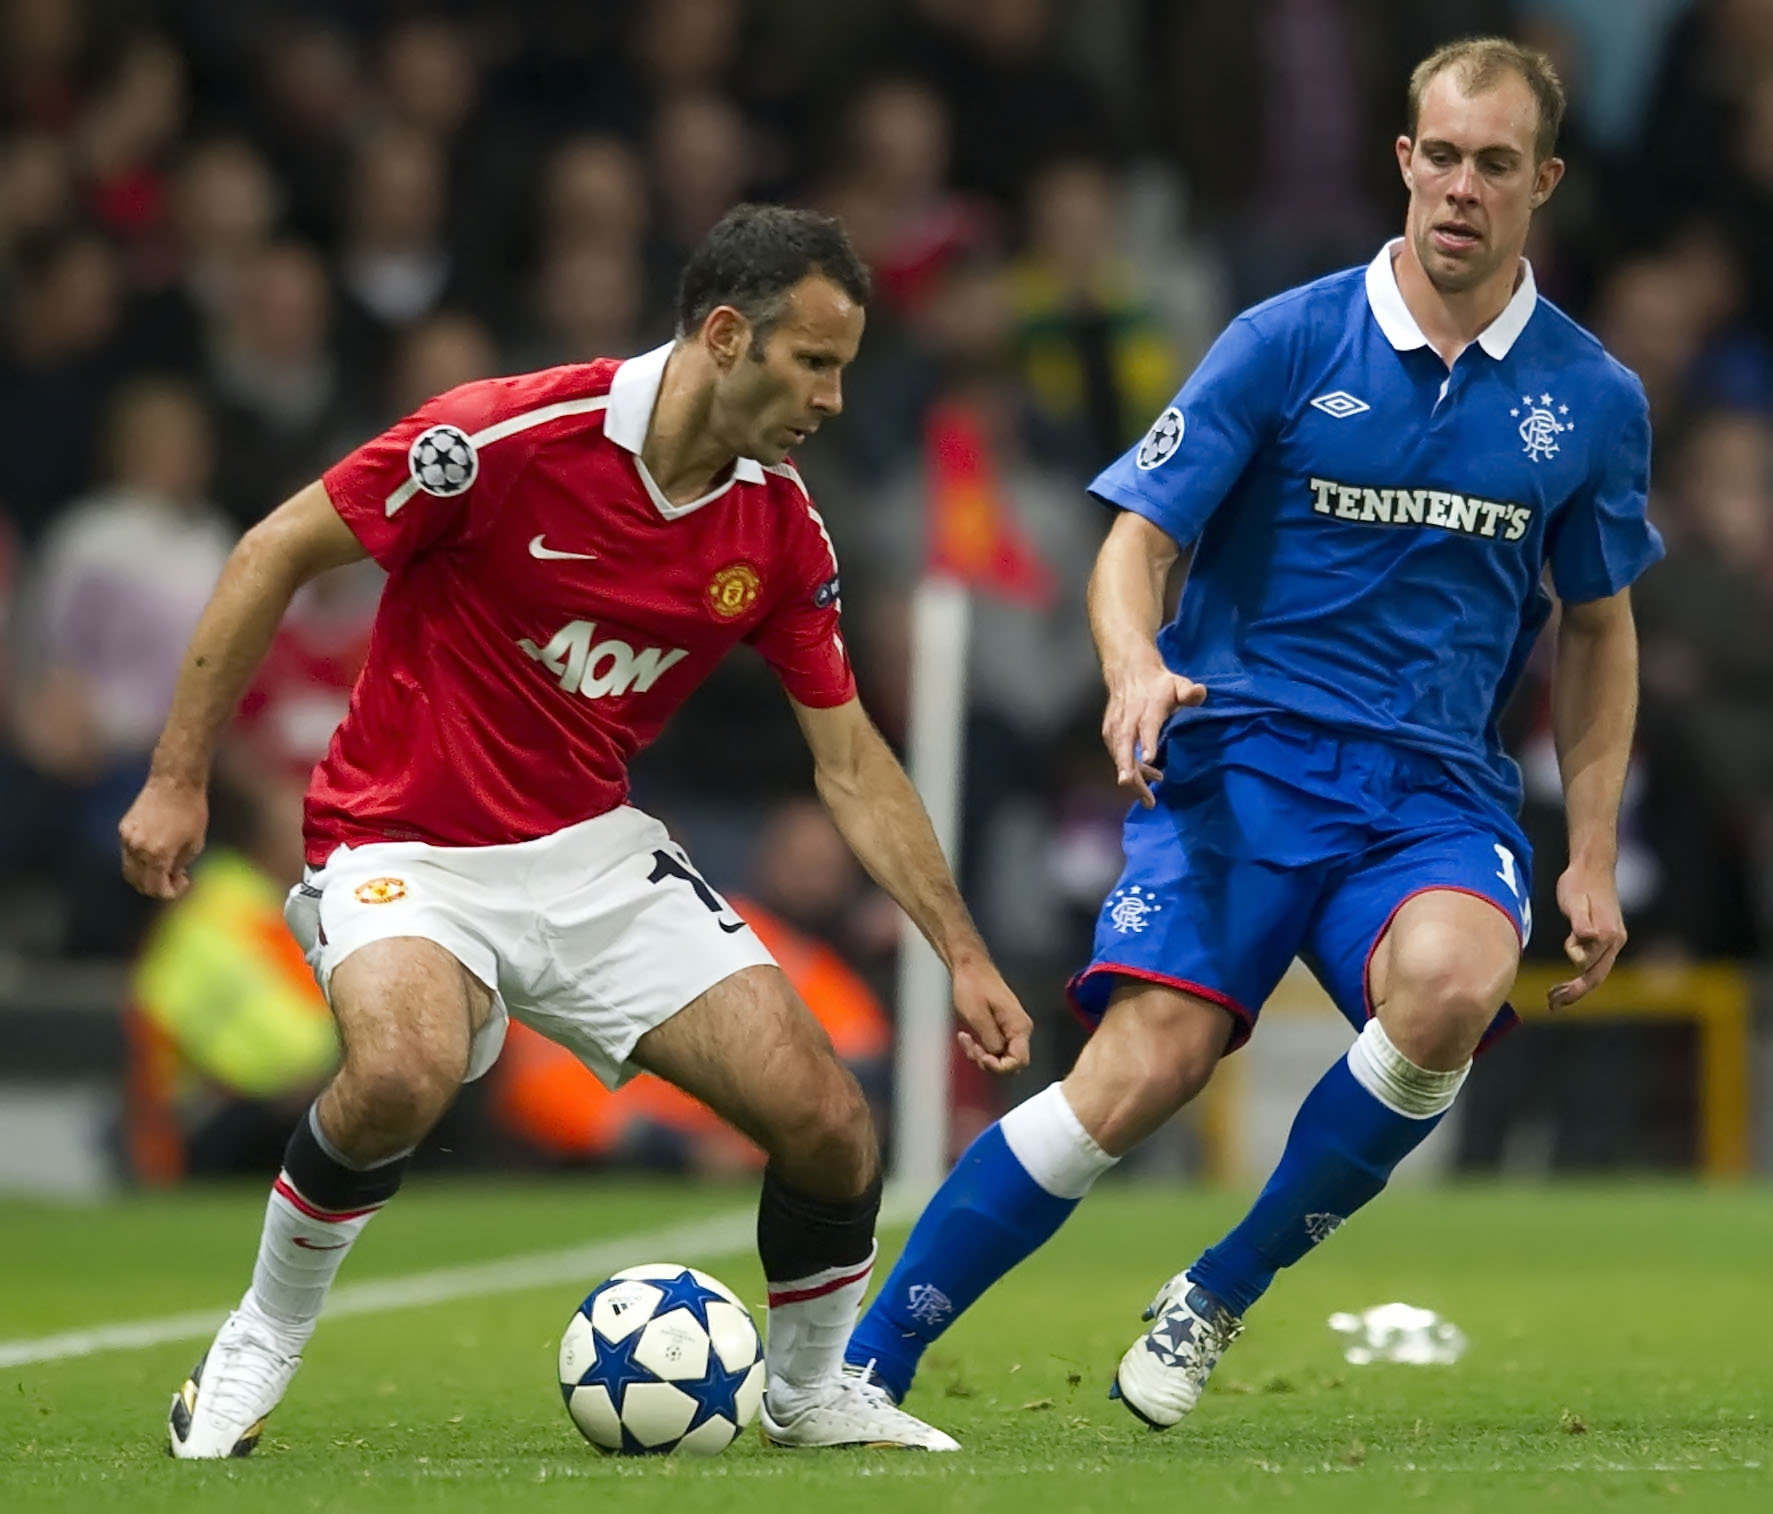 Steven Whittaker takes on Ryan Giggs in 0-0 draw. 